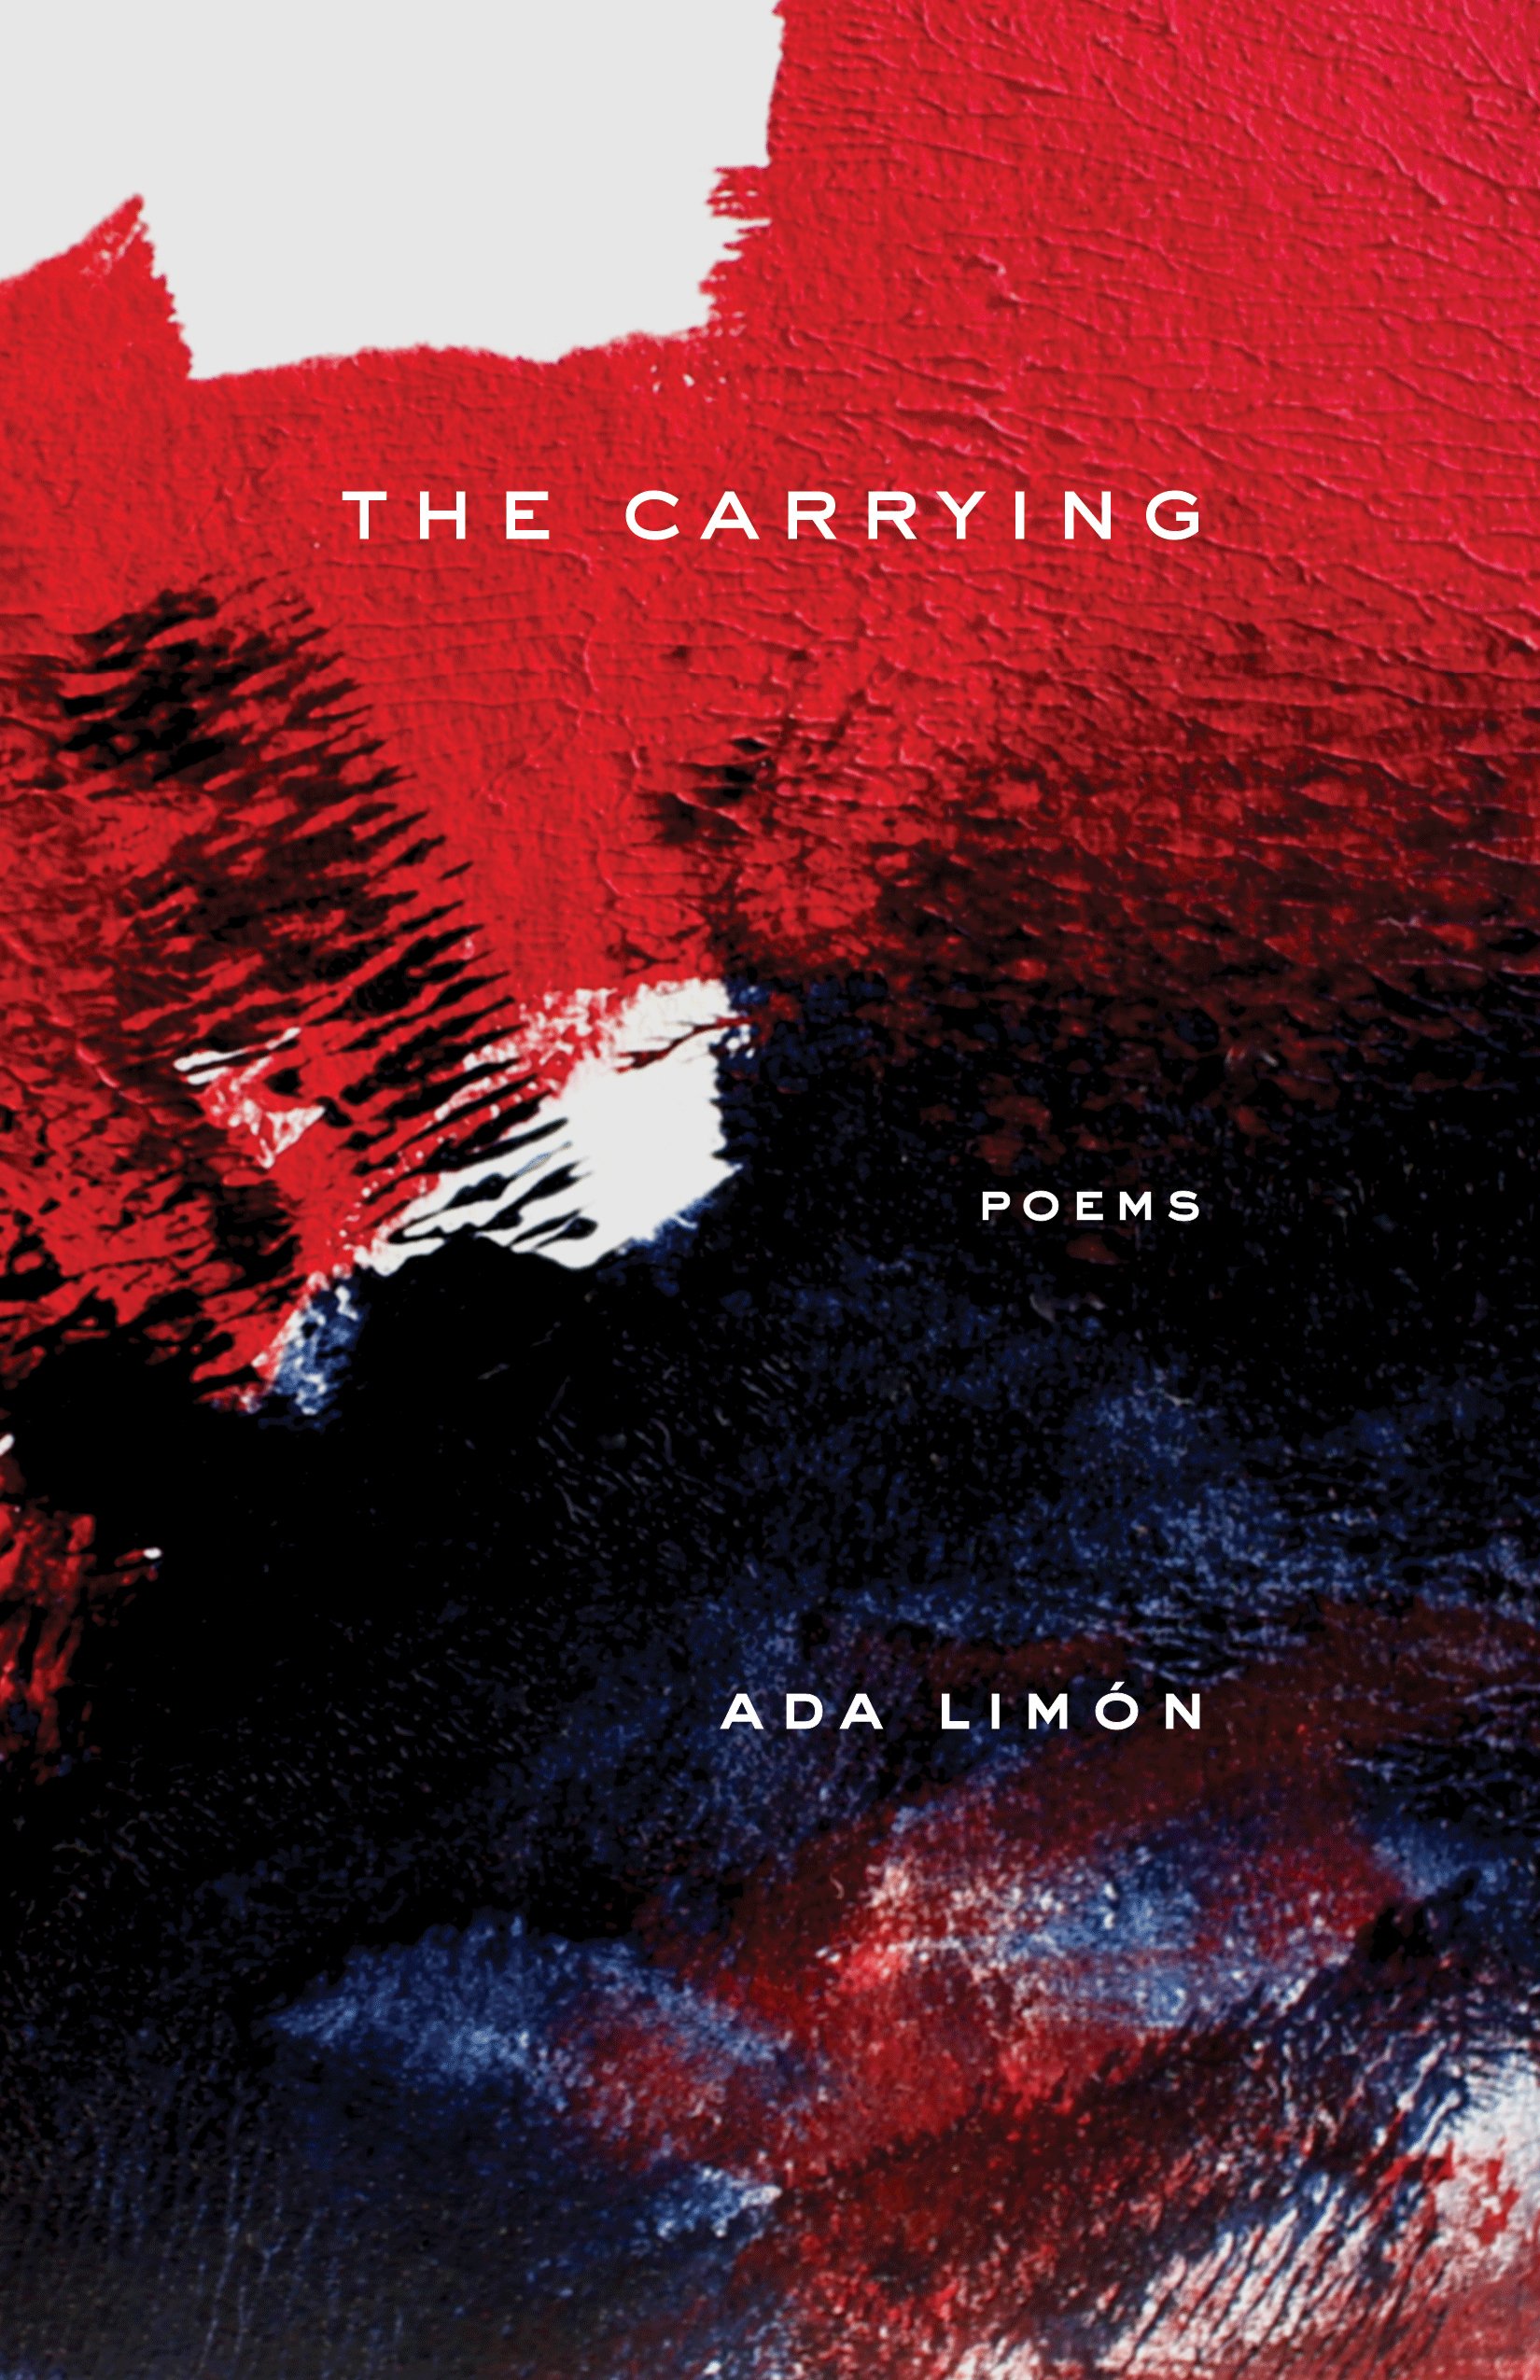 The Carrying (Milkweed Editions, August 2018)